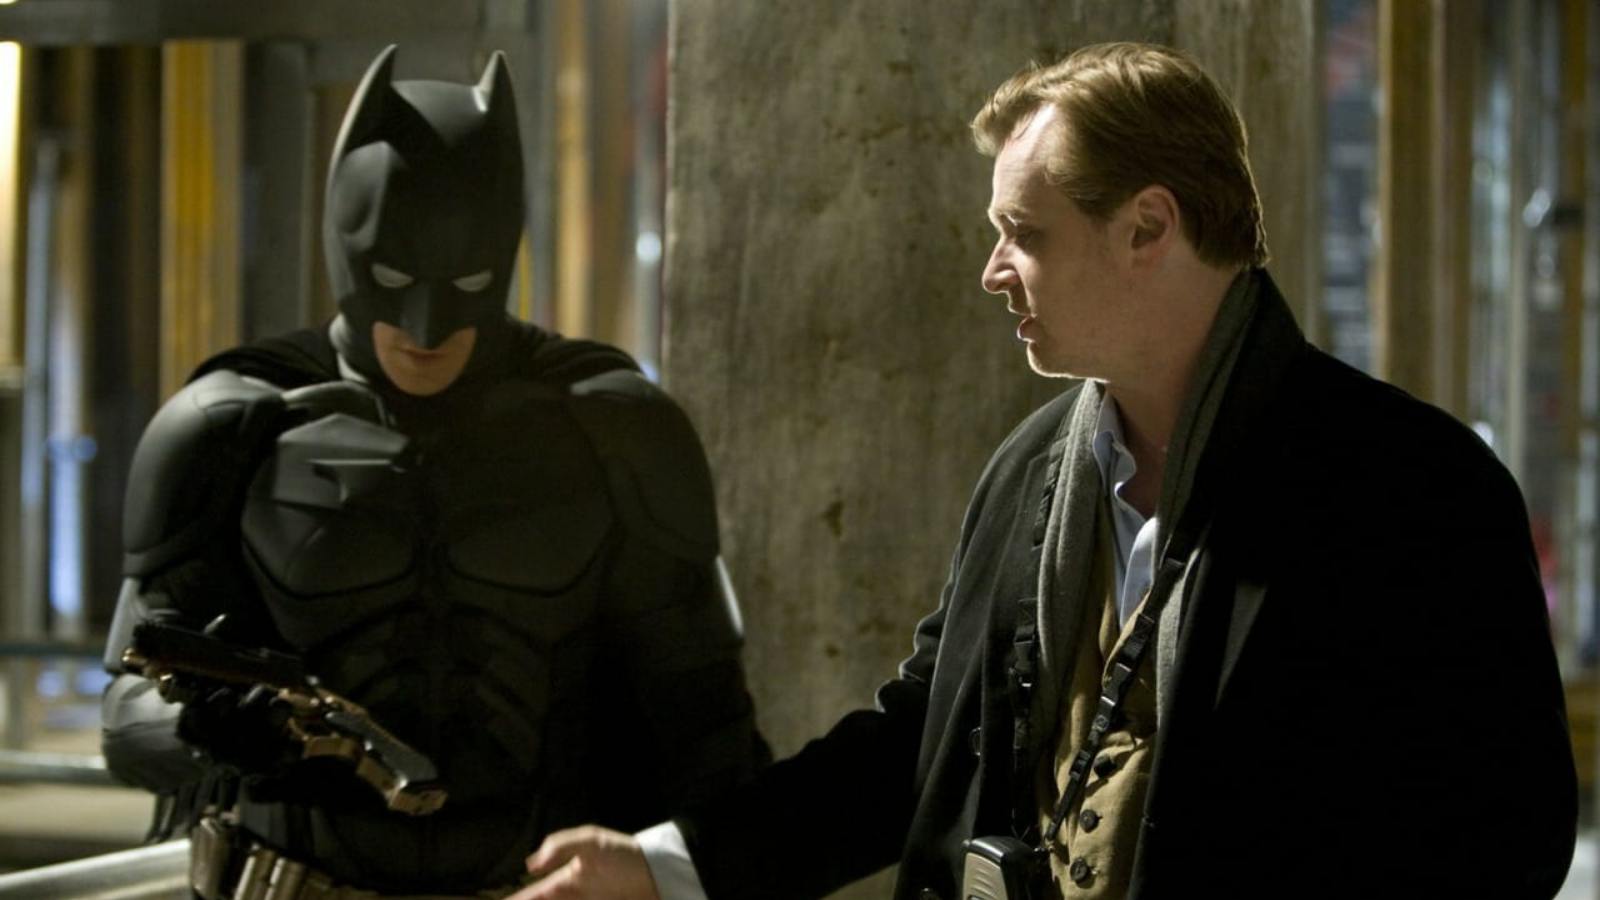 Nolan on the sets of The Dark Knight